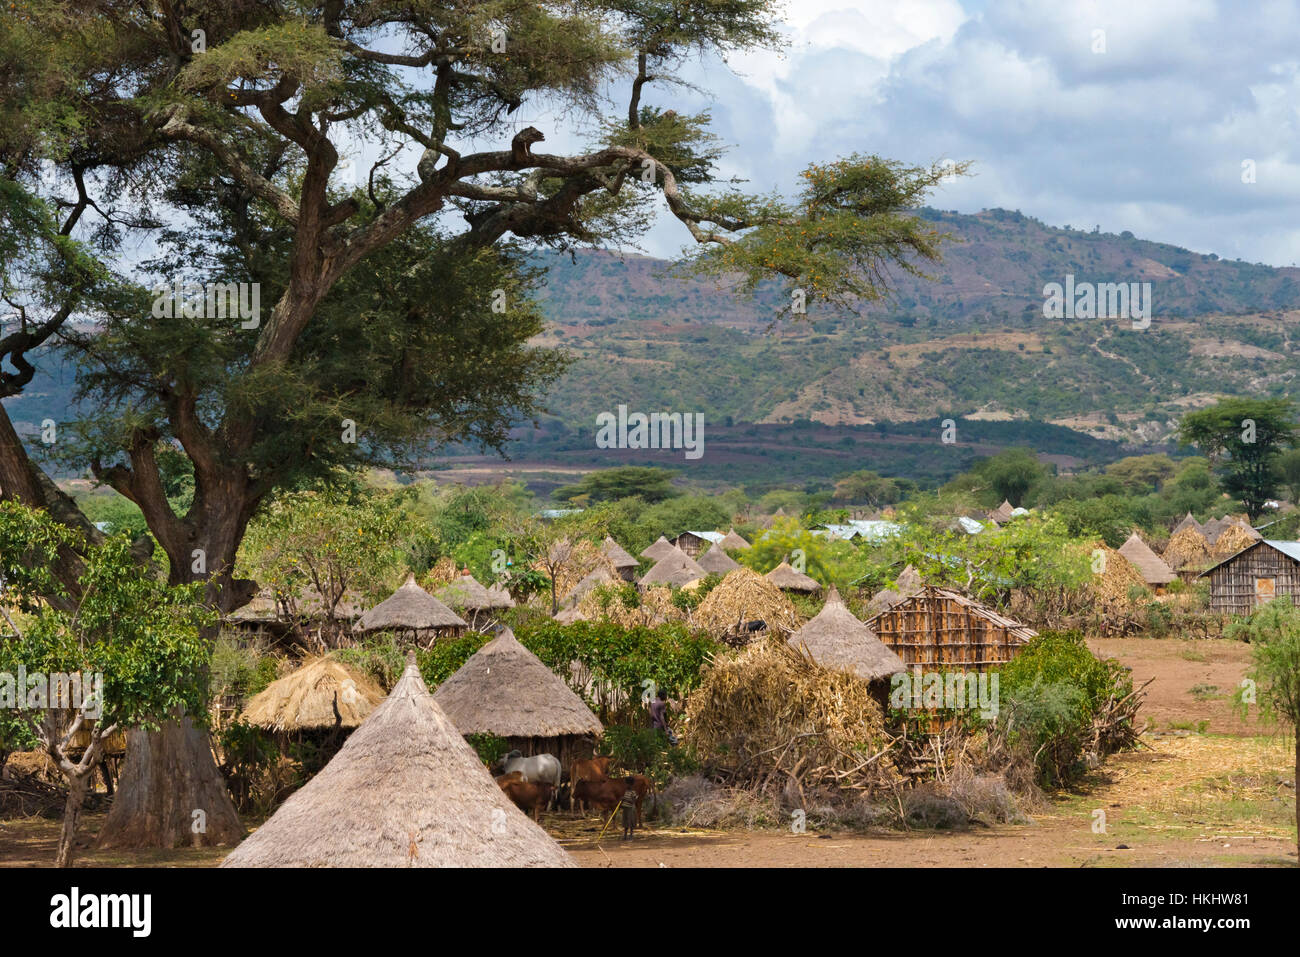 Traditional houses with thatched roof in the village, Konso, Ethiopia Stock Photo